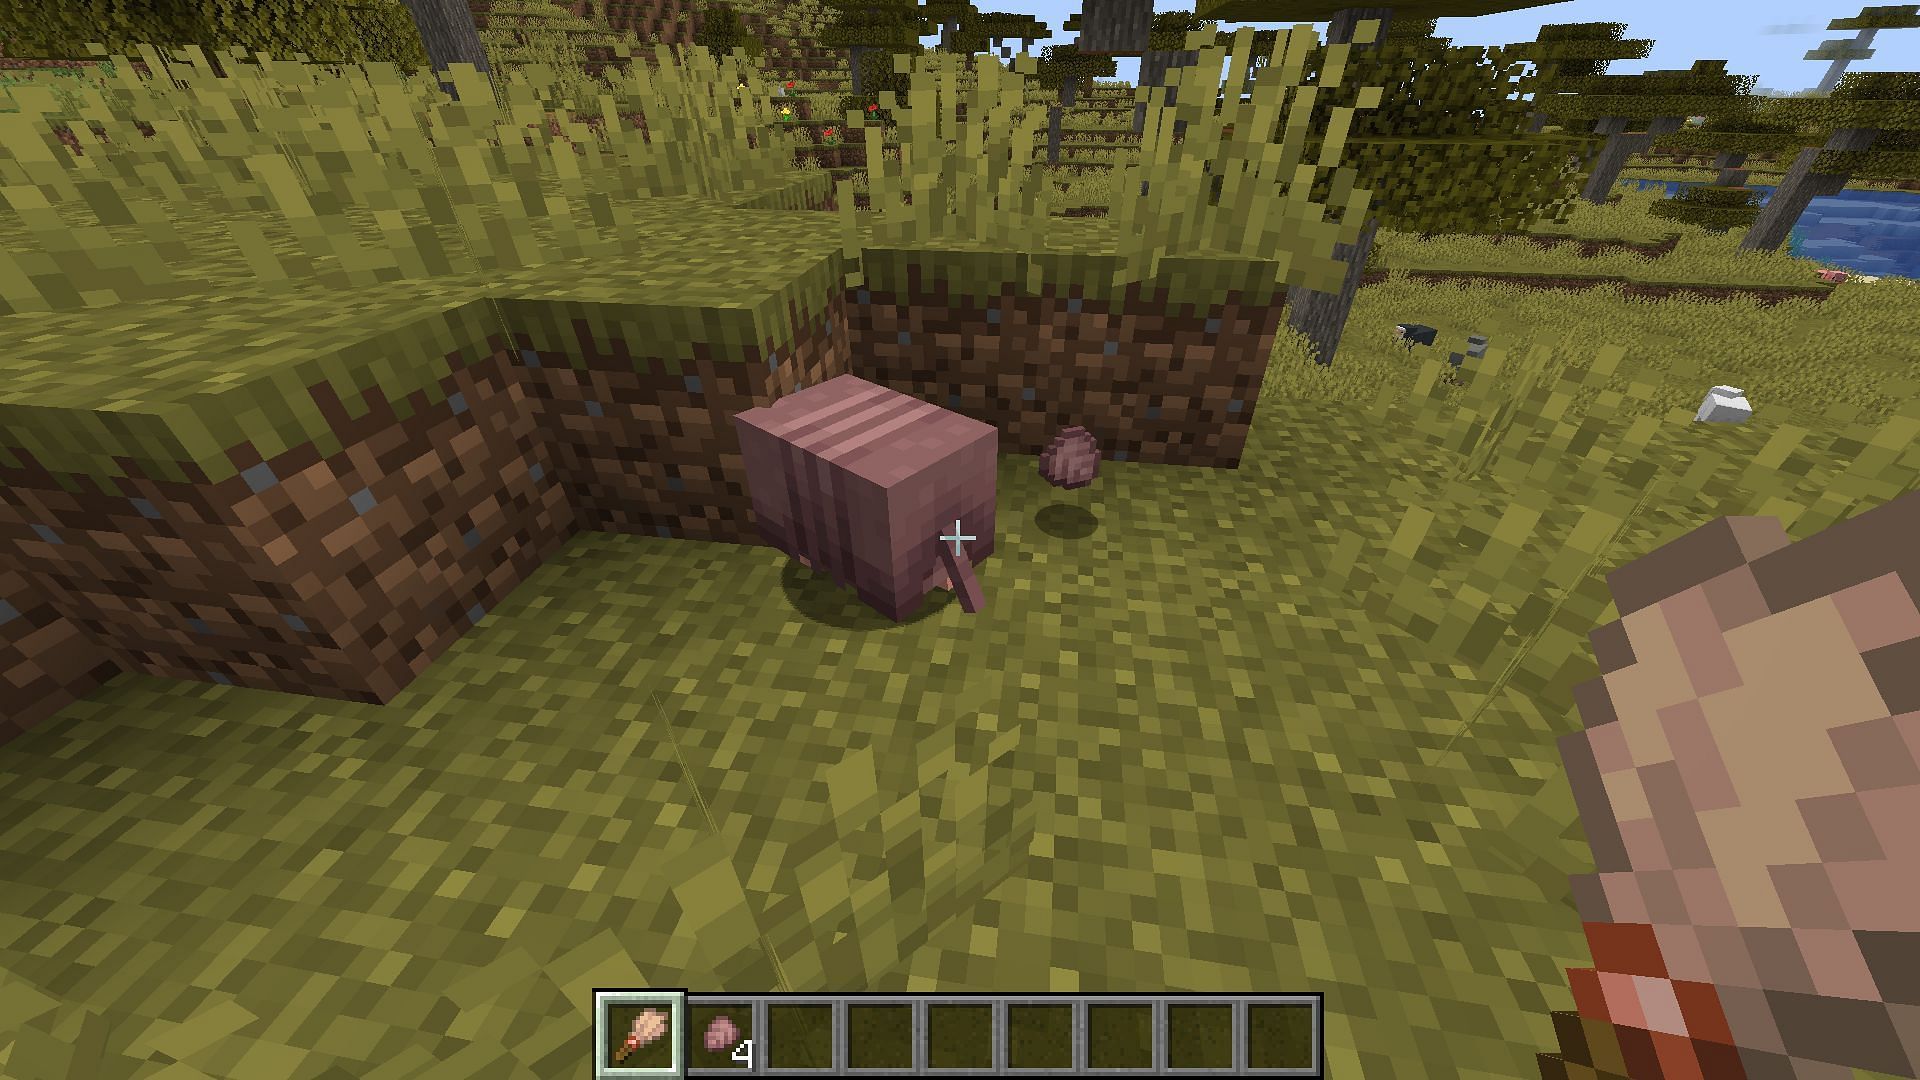 Armadillos drop scutes when they are brushed using the new brush tool (Image via Mojang)